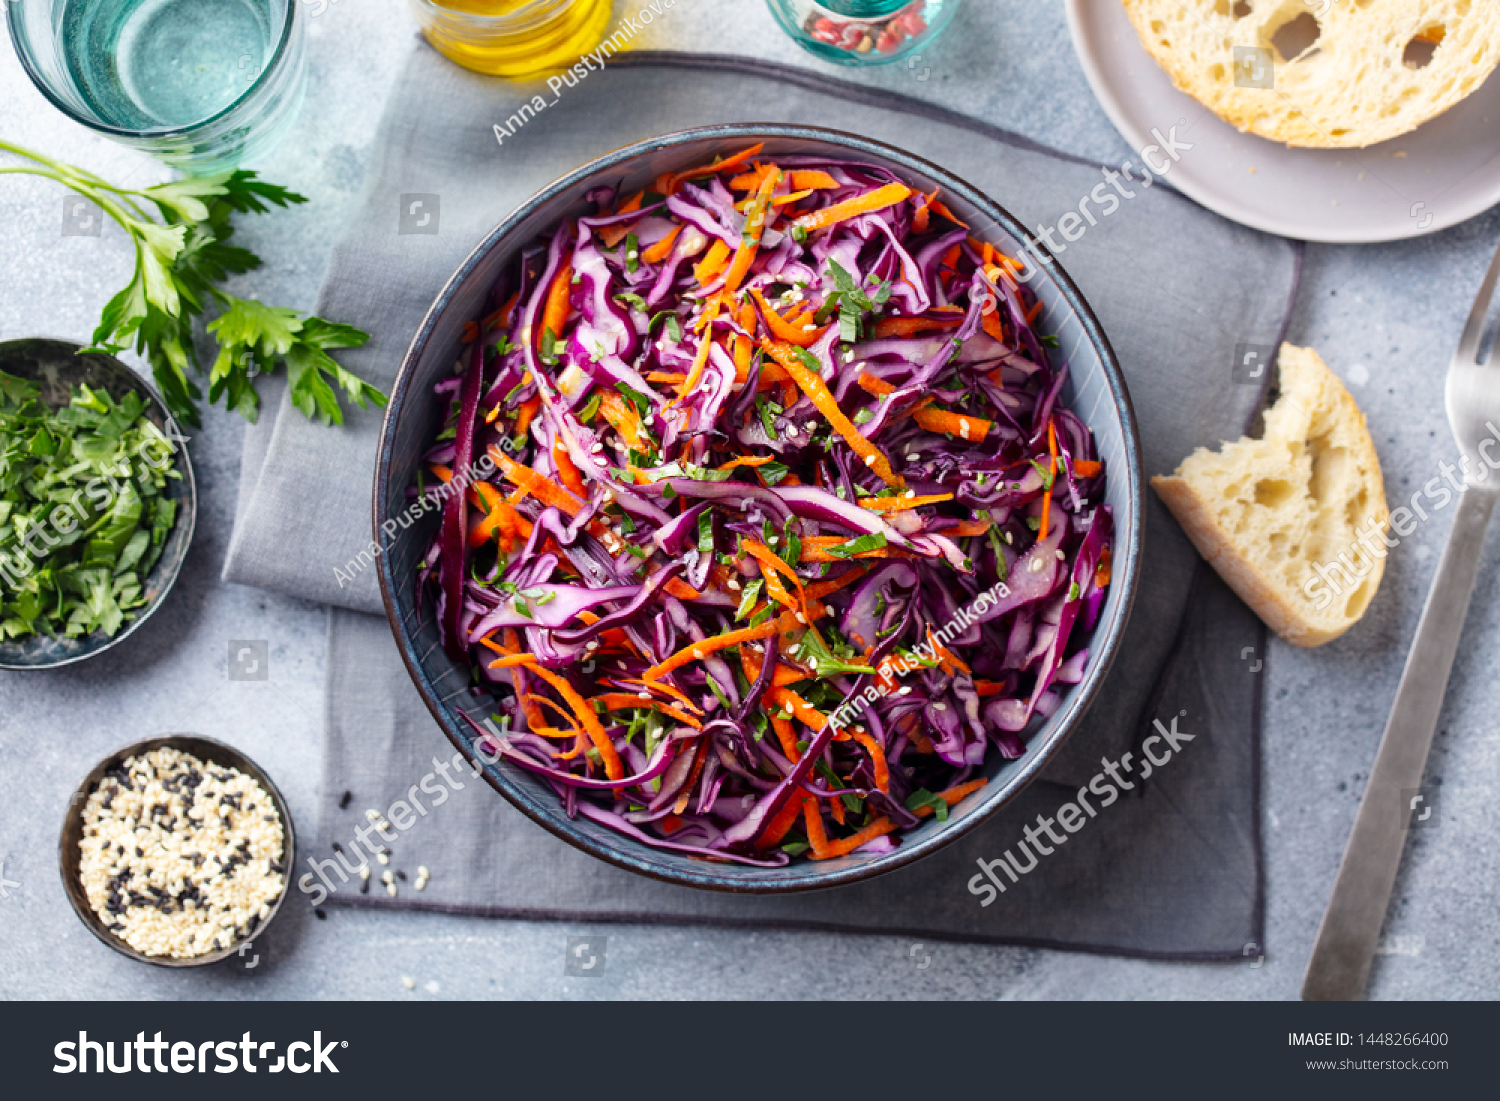 Red cabbage salad, Coleslaw in a bowl. Grey background. Top view. #1448266400